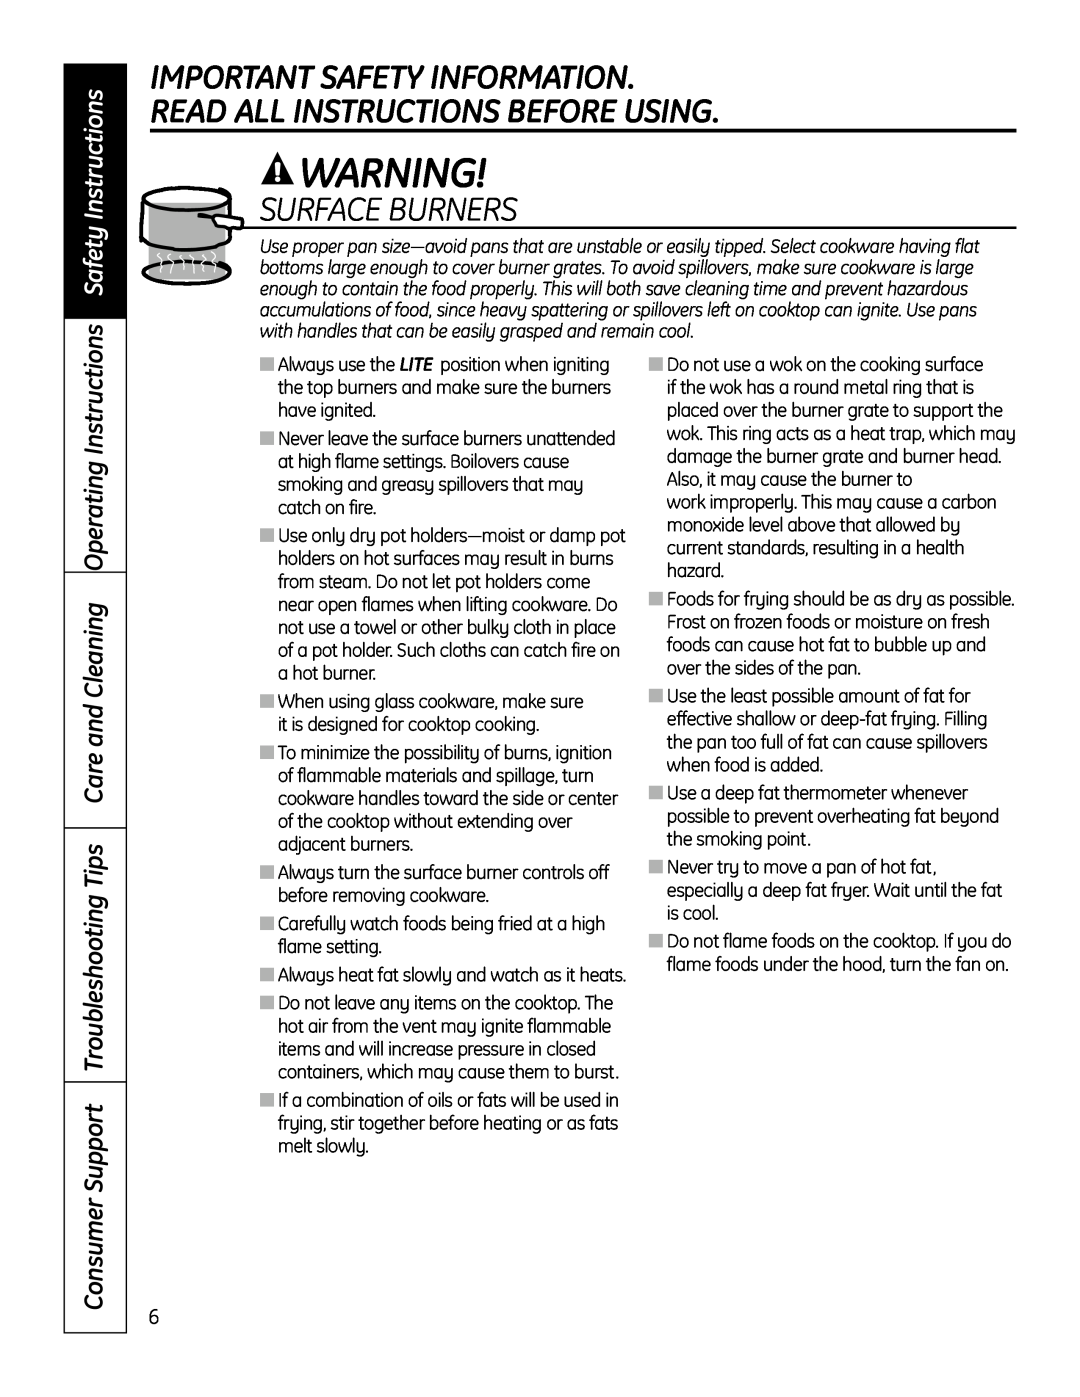 GE PGP989 manual Important Safety Information, Read All Instructions Before Using, Surface Burners, Safety Instructions 